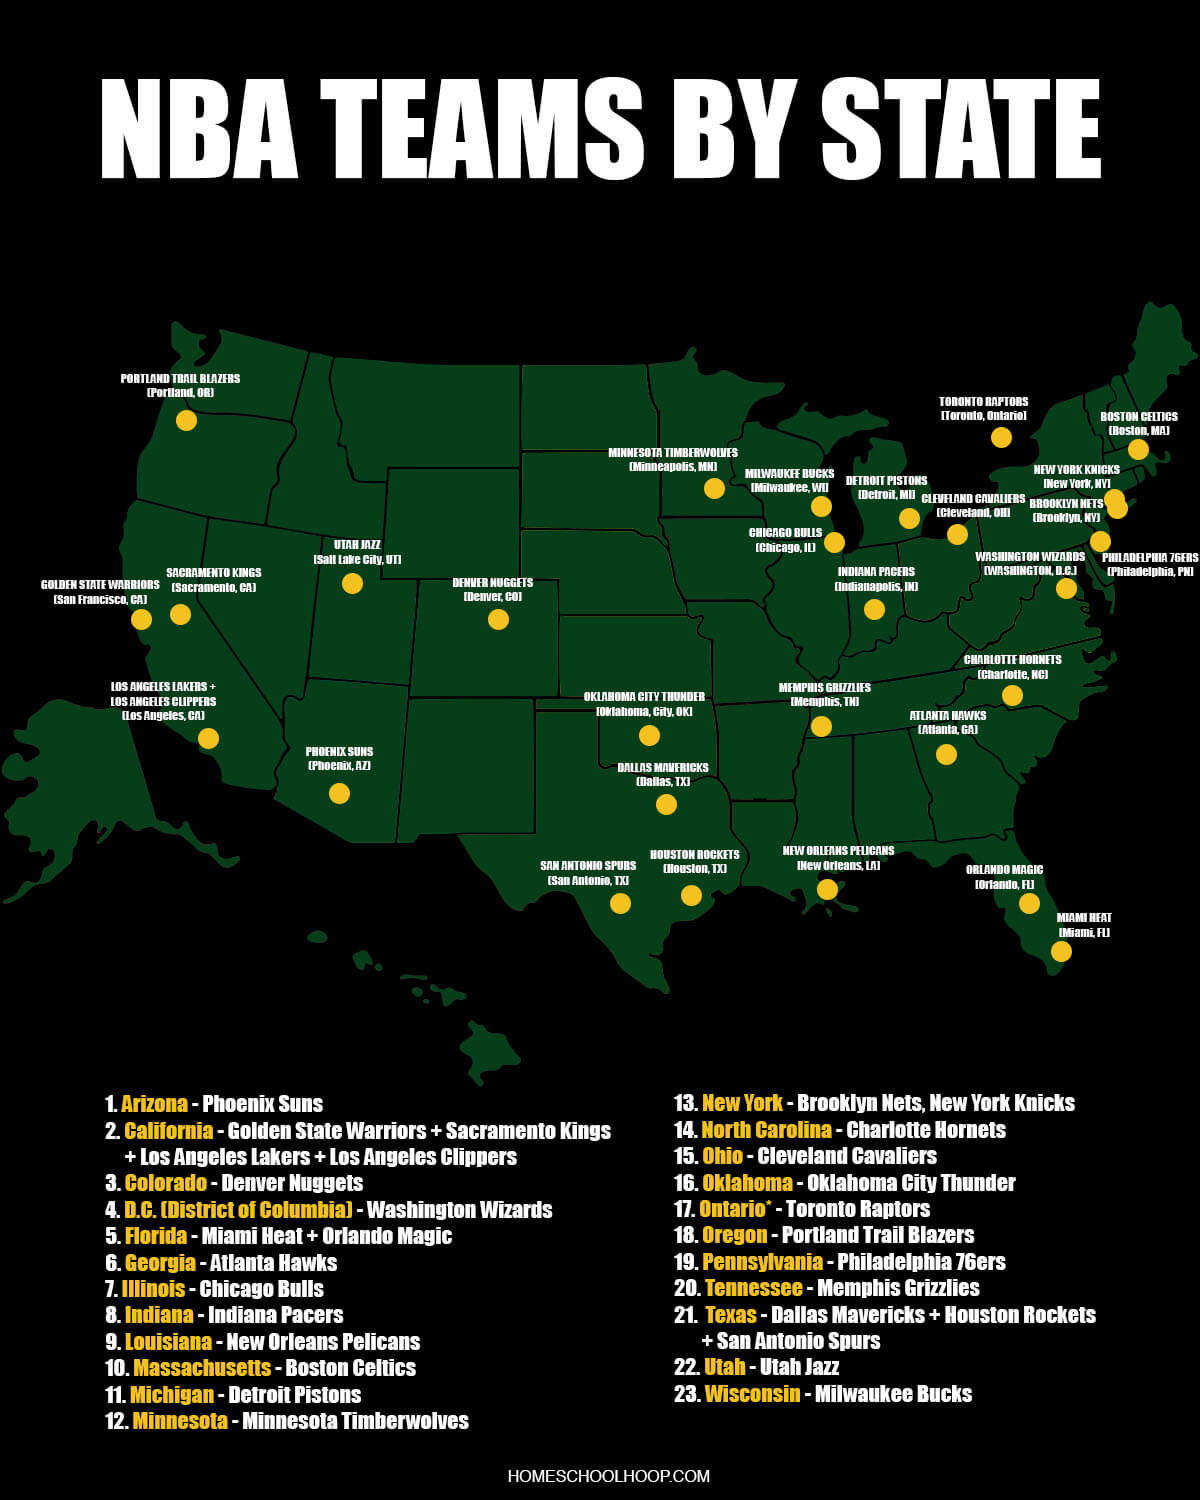 An infographic with a map showing the location of all 30 NBA teams and a list of NBA teams by state.